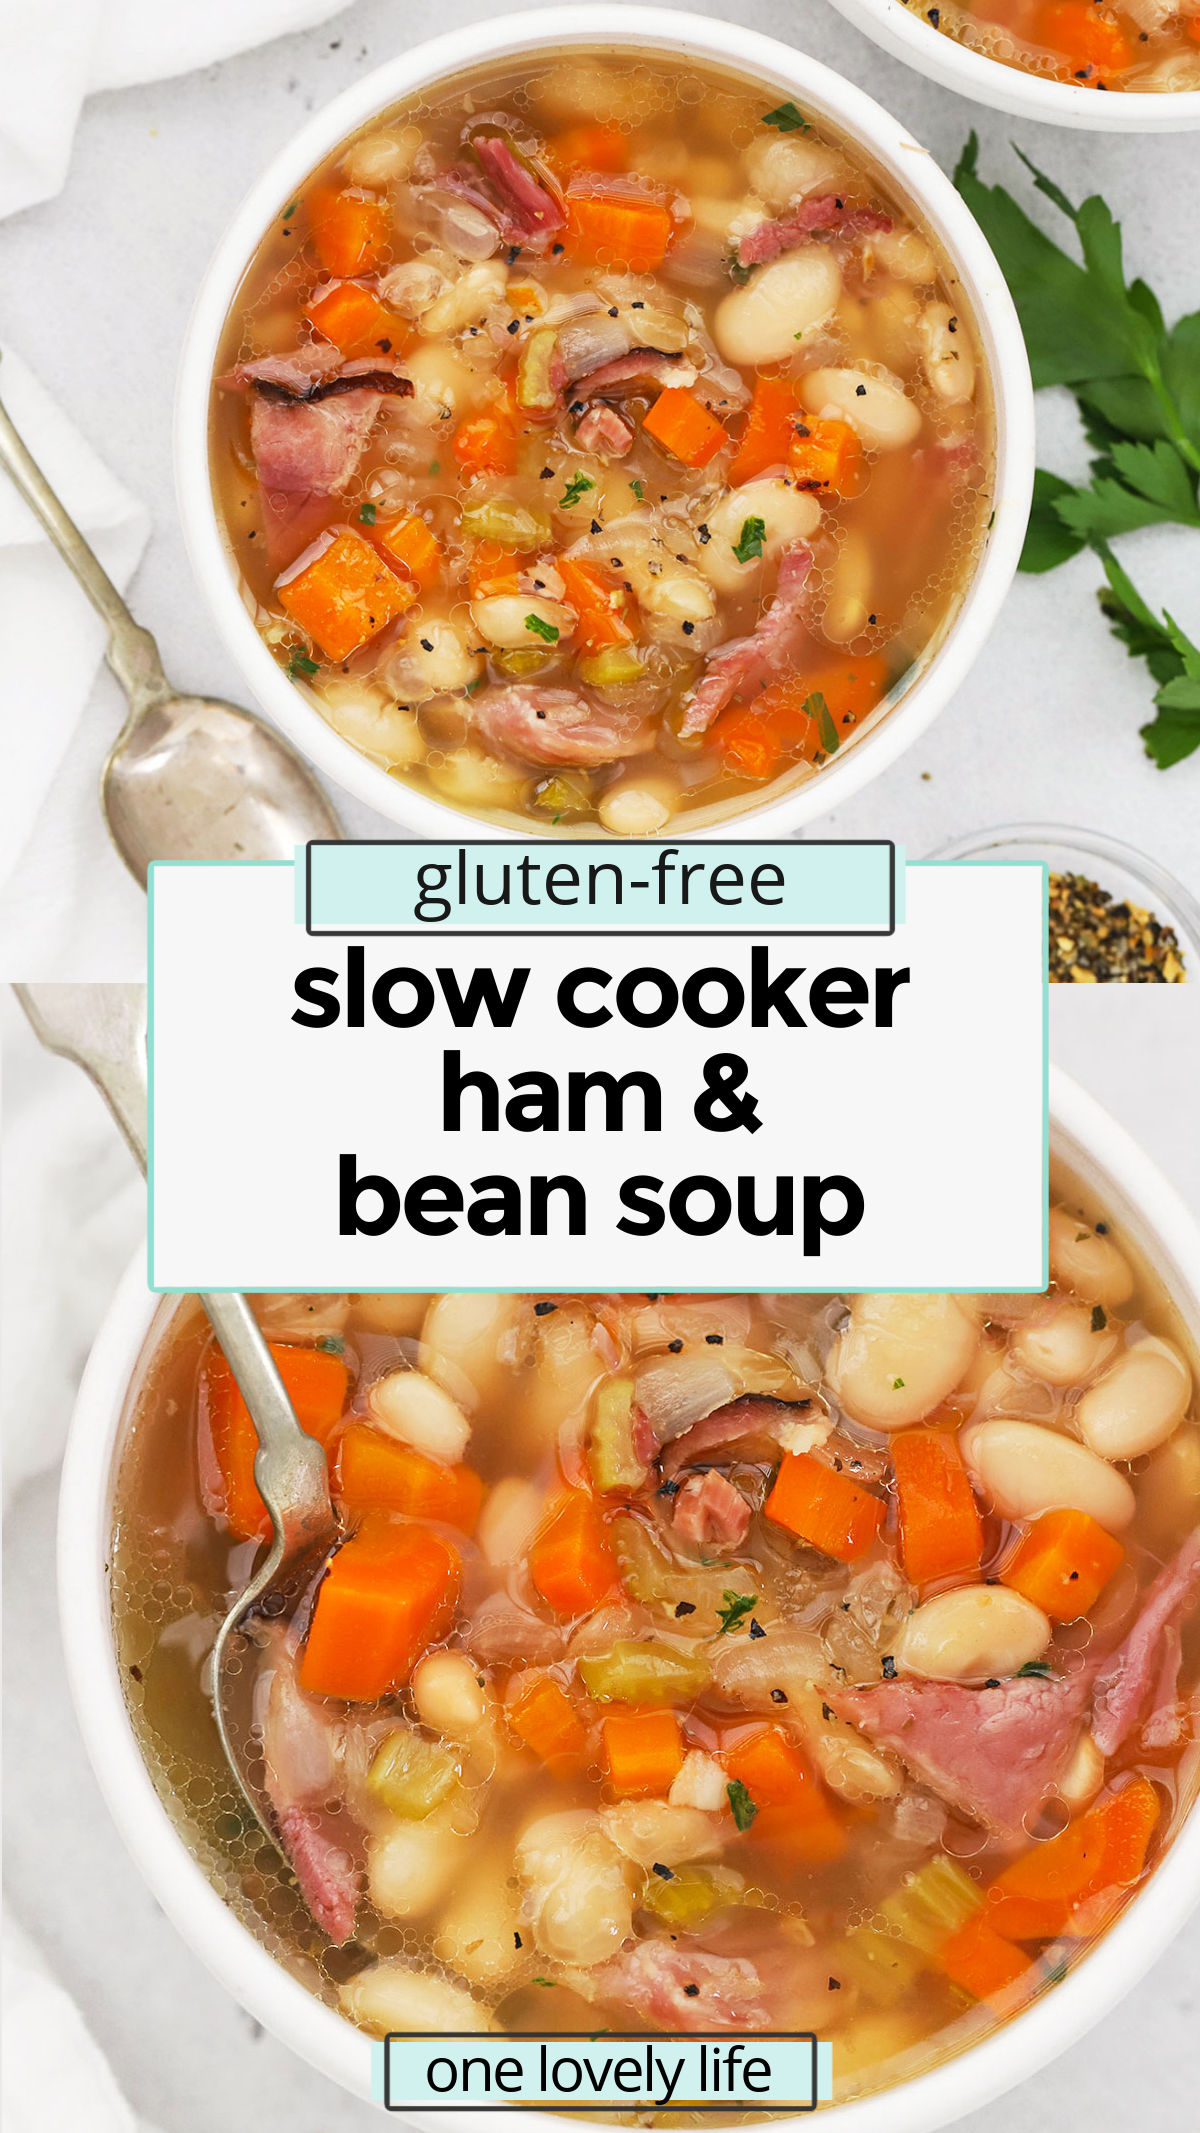 Slow Cooker Ham And Bean Soup - This cozy crock pot ham bean soup is the perfect way to use up leftover ham from the holidays! You'll love the flavor. // ham leftovers // healthy slow cooker soup // healthy crock pot soup // gluten free slow cooker soup / gluten free crock pot soup / ideas for leftover ham /